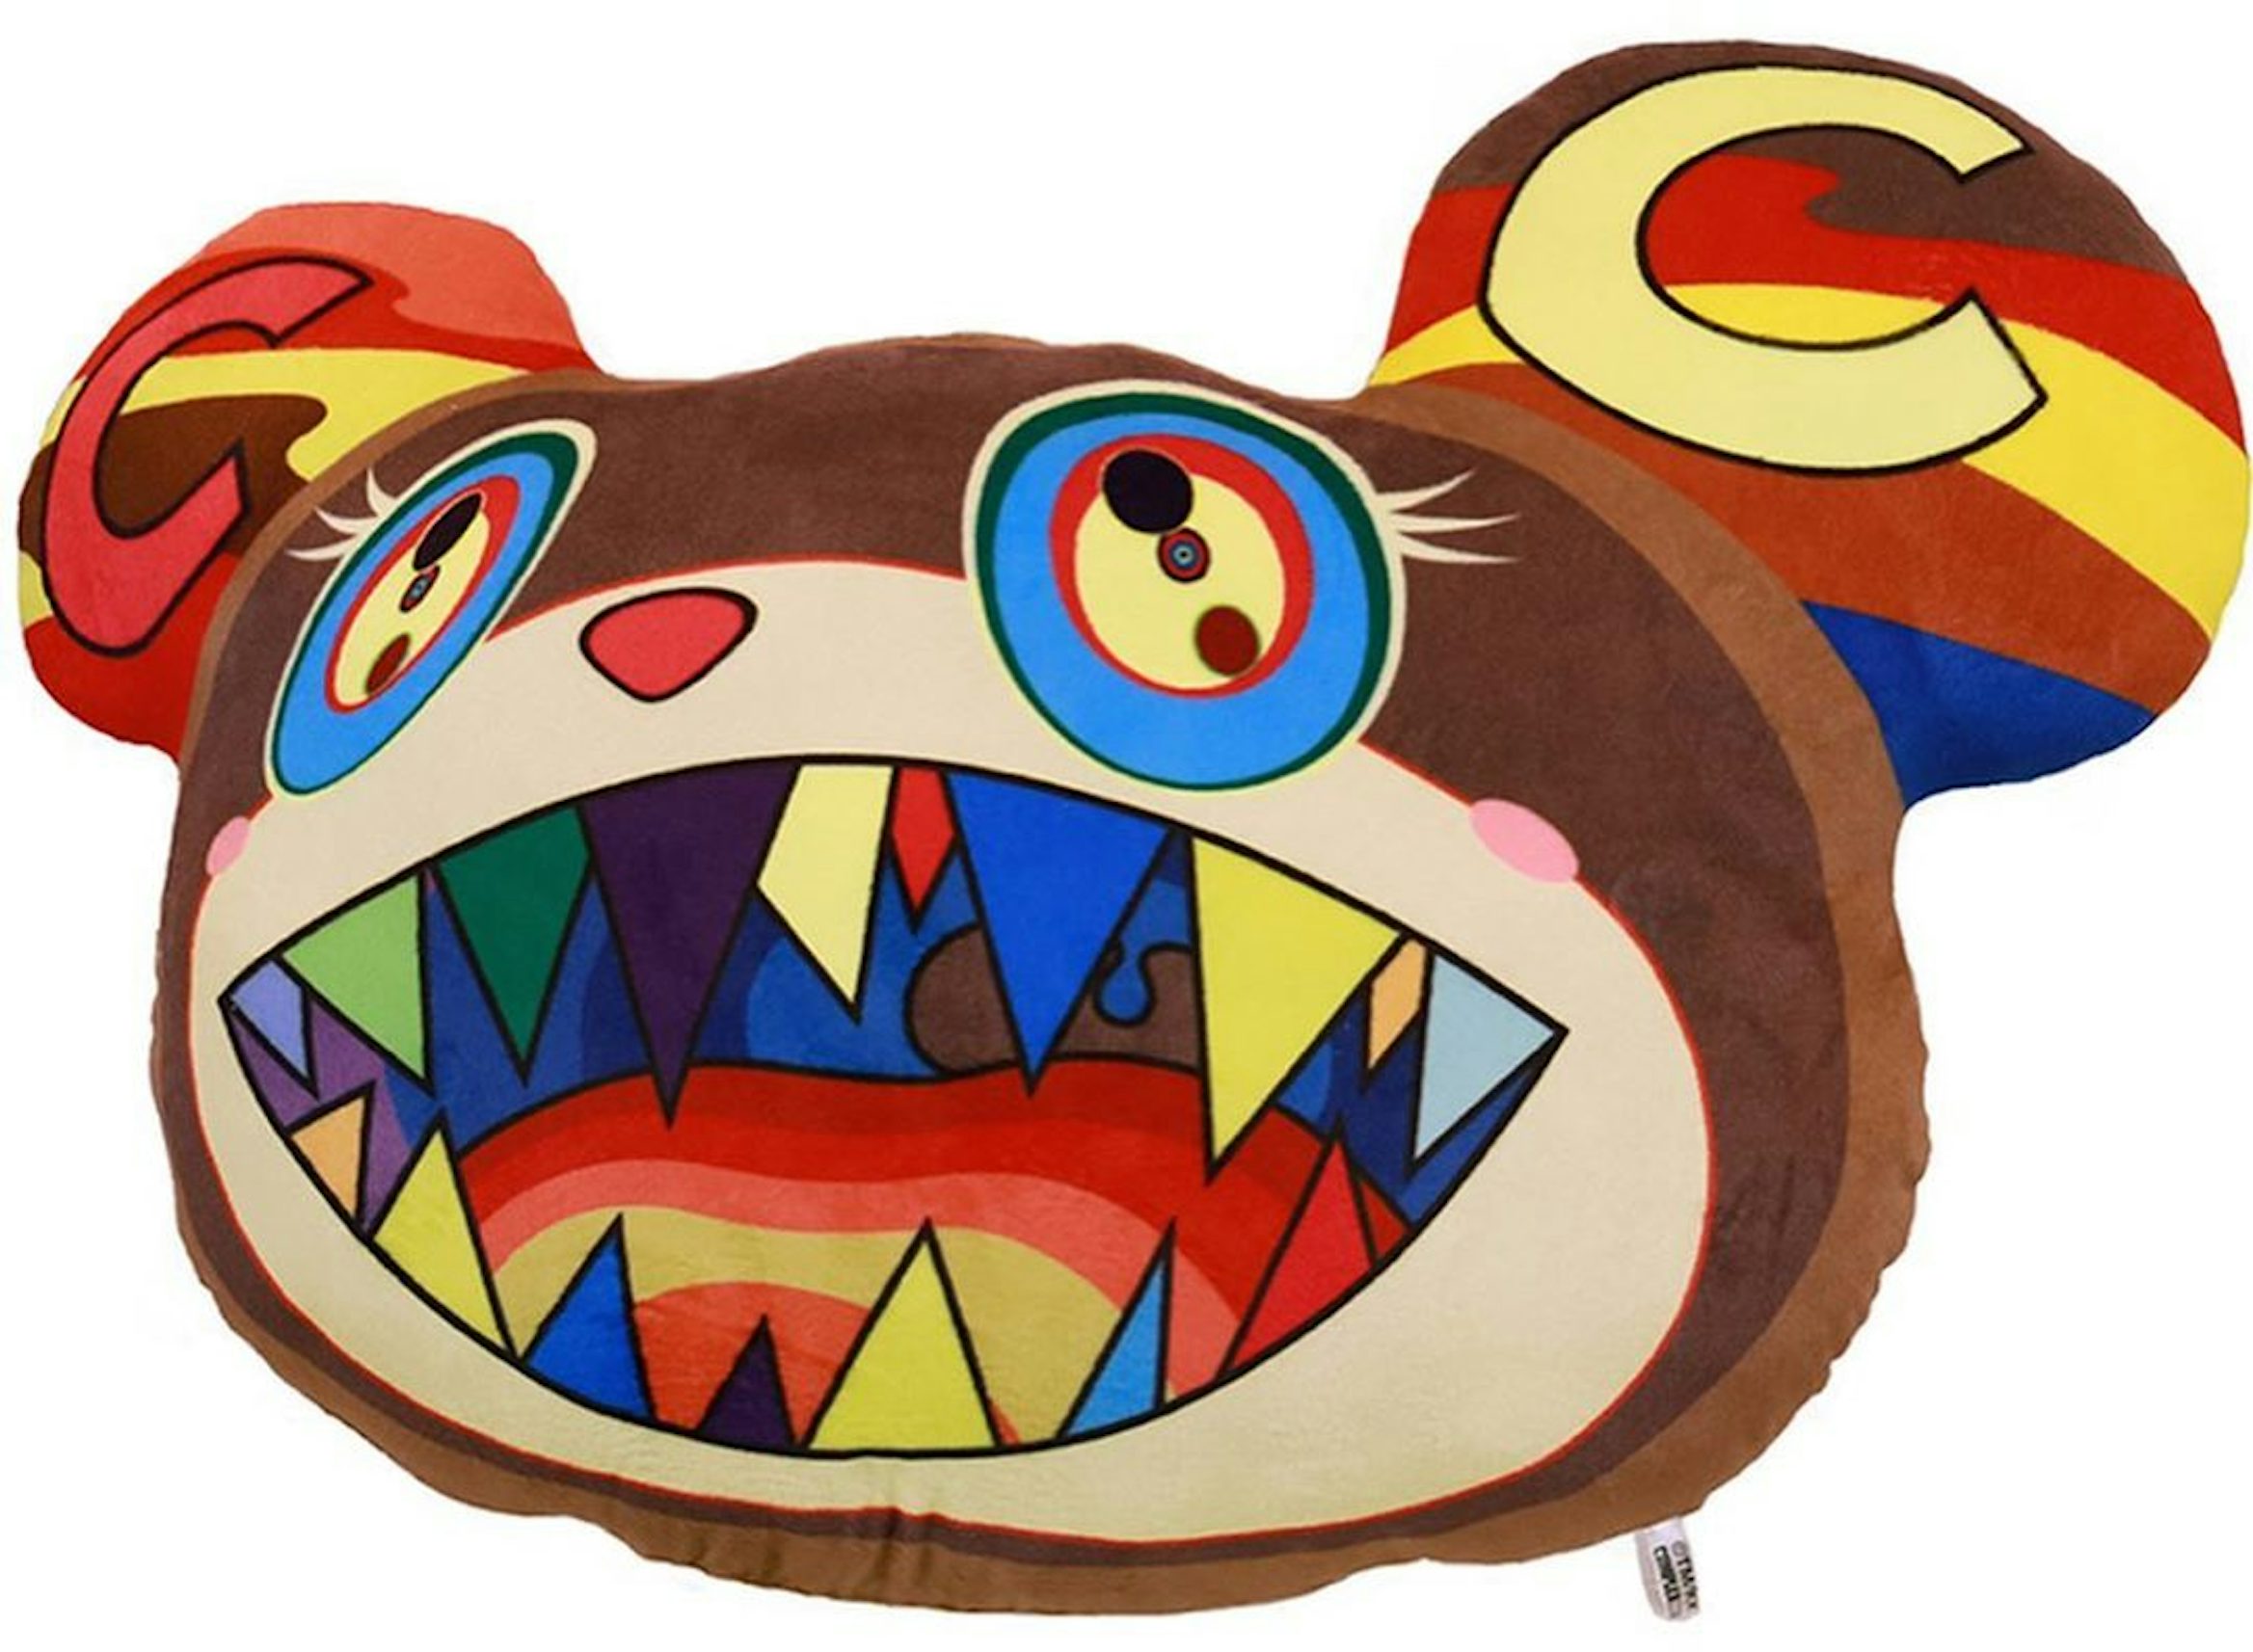 Affordable murakami pillow For Sale, Cushions & Throws